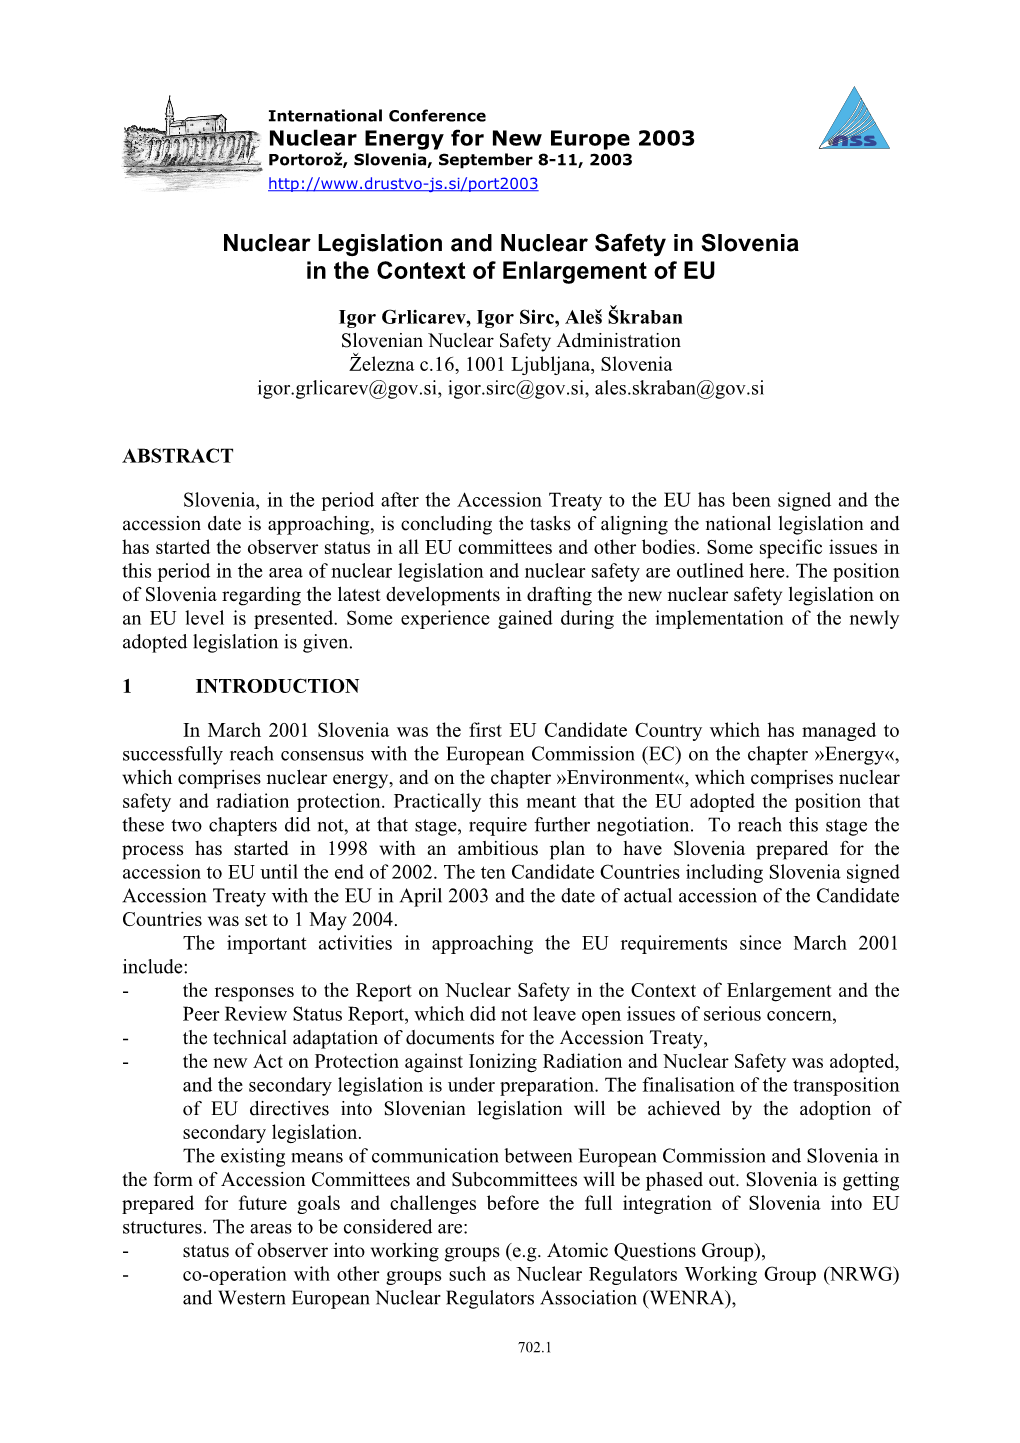 Nuclear Legislation and Nuclear Safety in Slovenia in the Context of Enlargement of EU